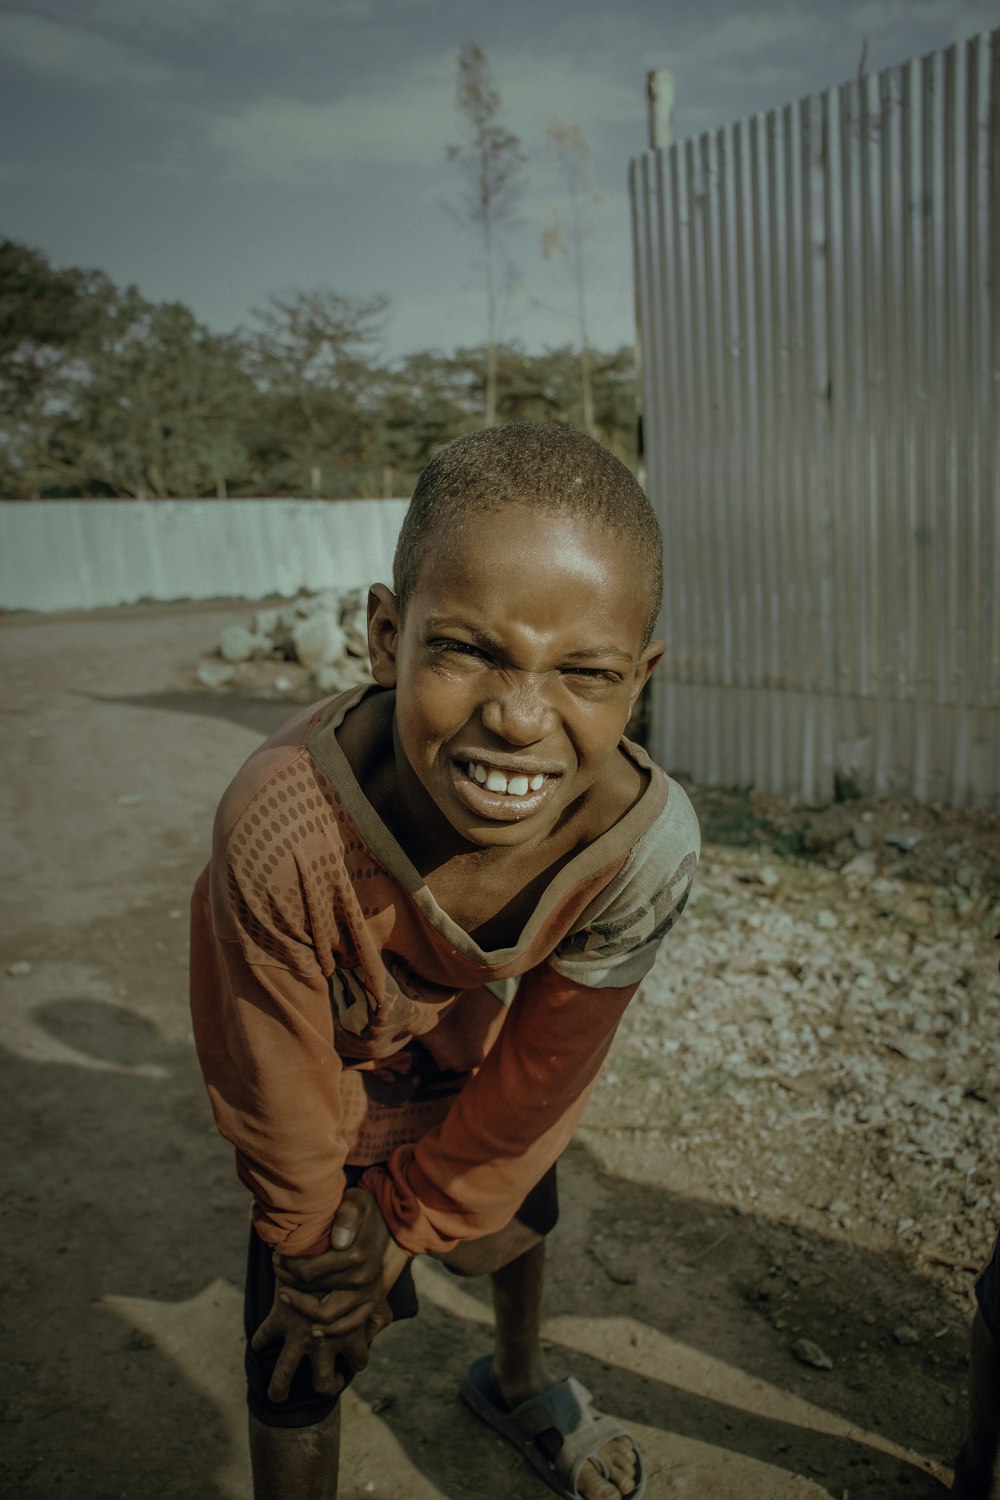 a young boy is smiling for the camera